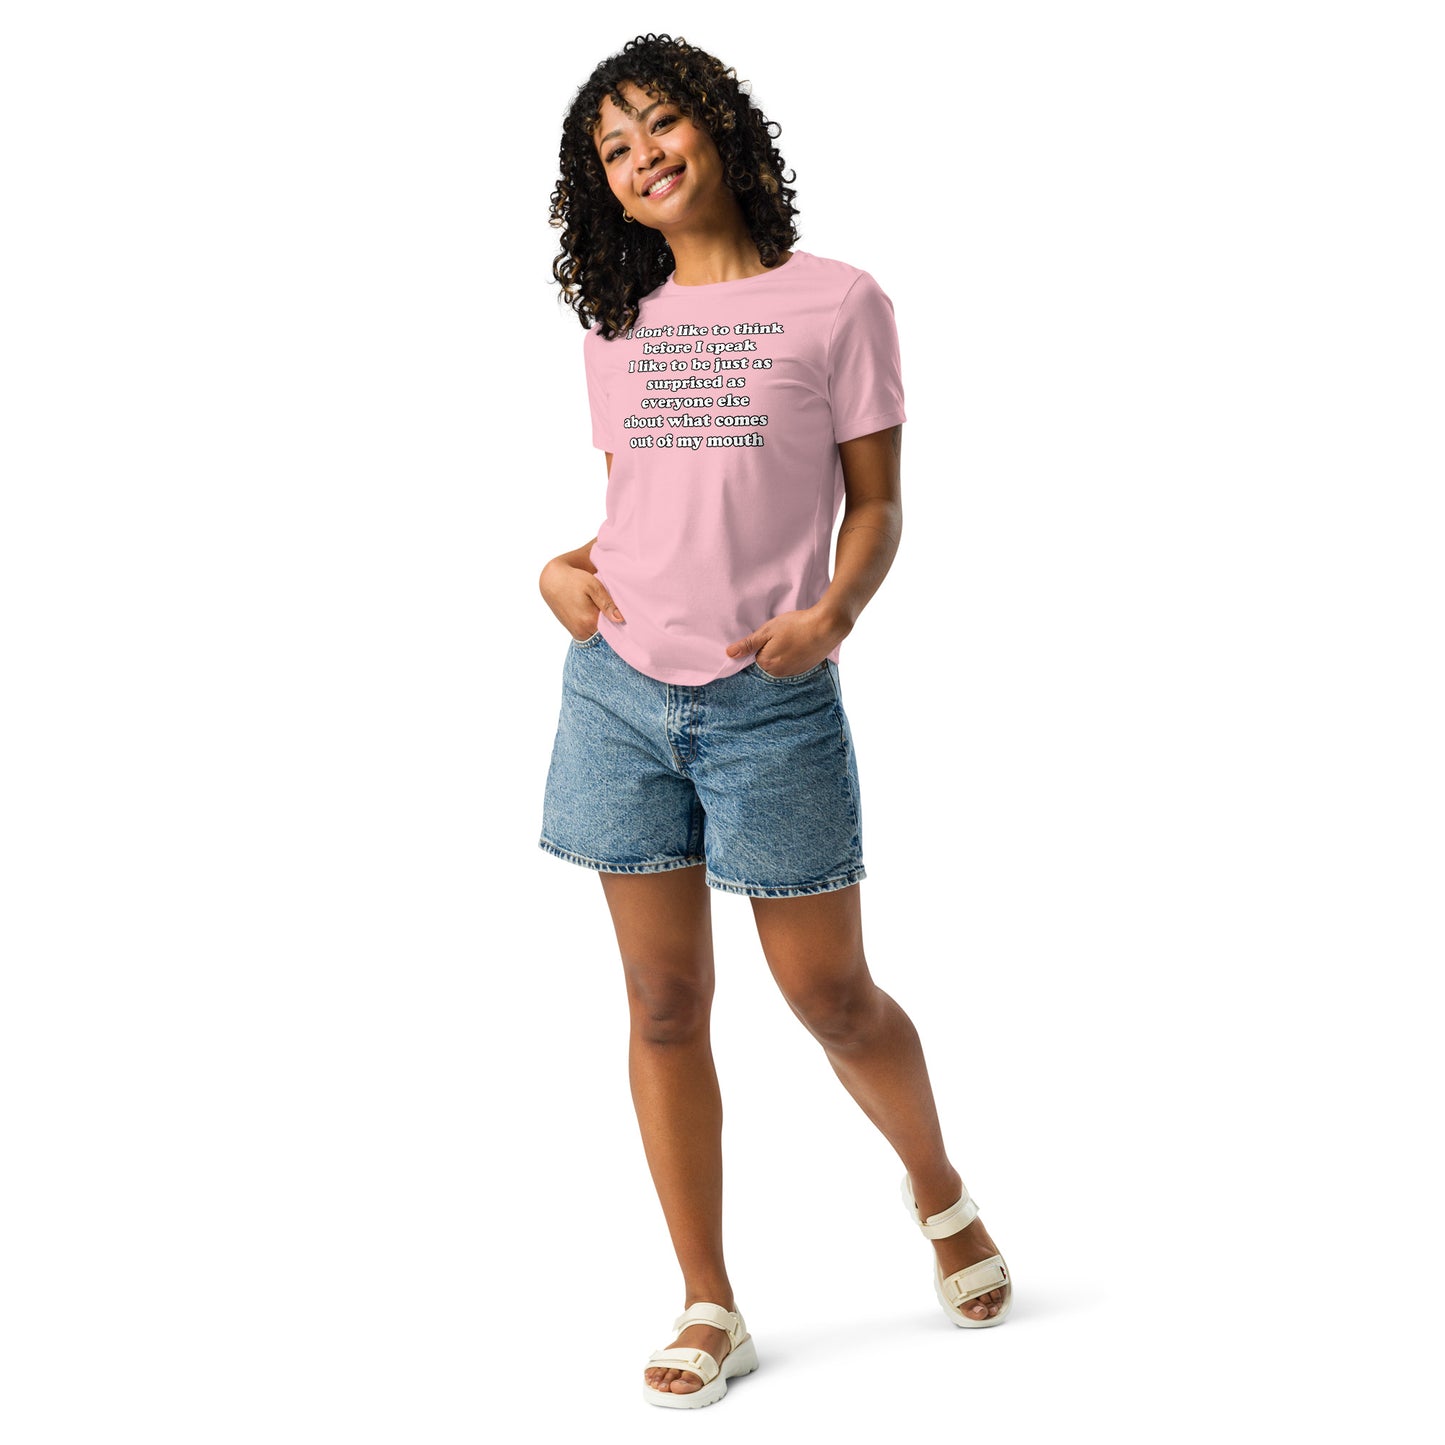 Woman with pink t-shirt with text “I don't think before I speak Just as serprised as everyone about what comes out of my mouth"